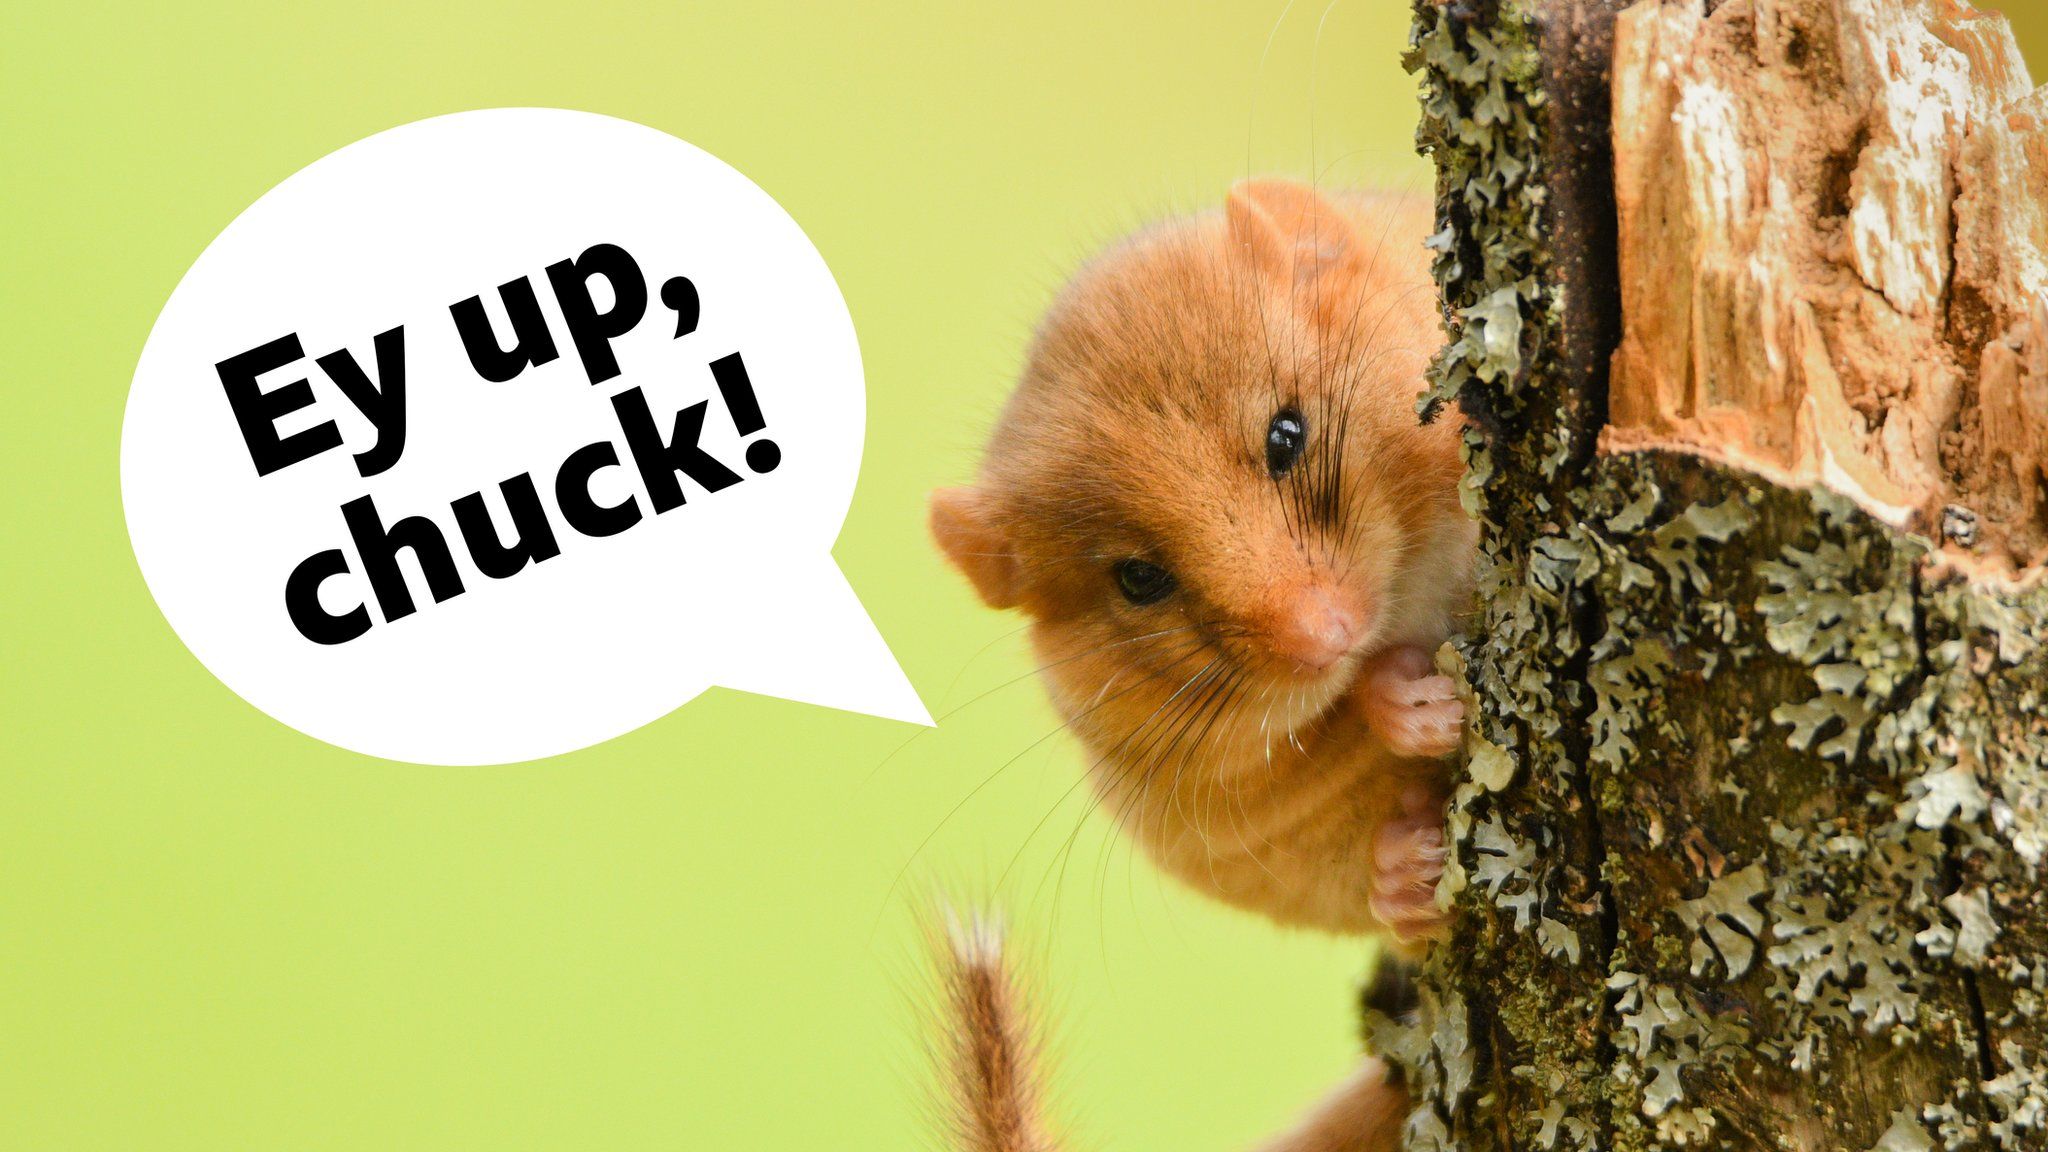 dormouse holding on to a tree with a speech bubble that reads "ey up, chuck"